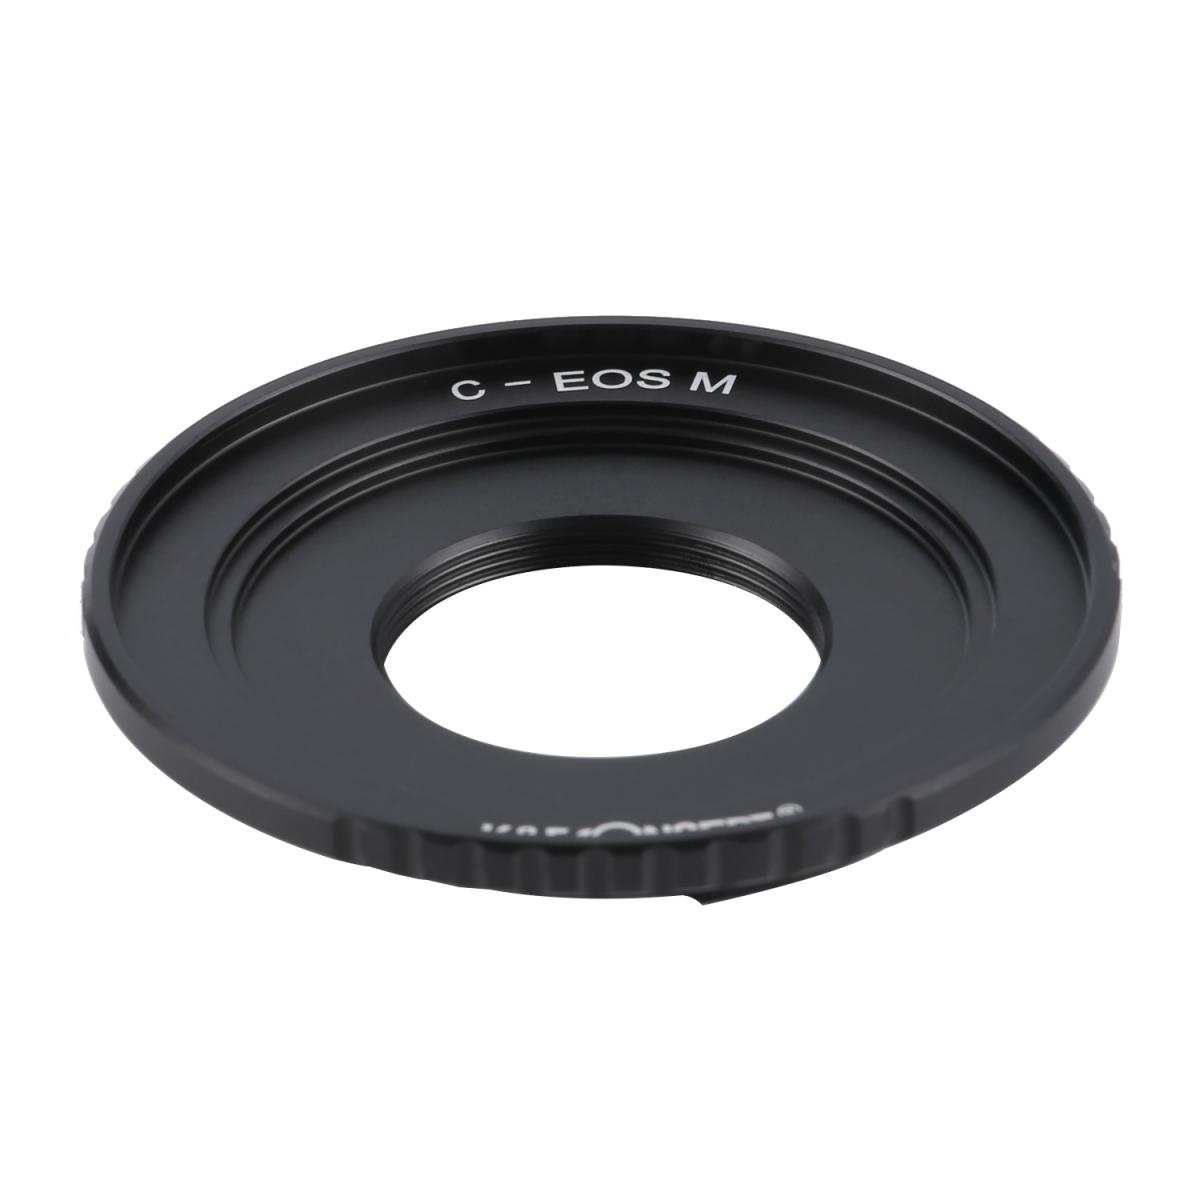 Contax C/G CG Lens to Canon EOS M EF-M EOS-M Adapter Mirrorless Cameras, C Lenses to Canon EOS M Lens Mount Adapter K&F Concept M25141 Lens Adapter